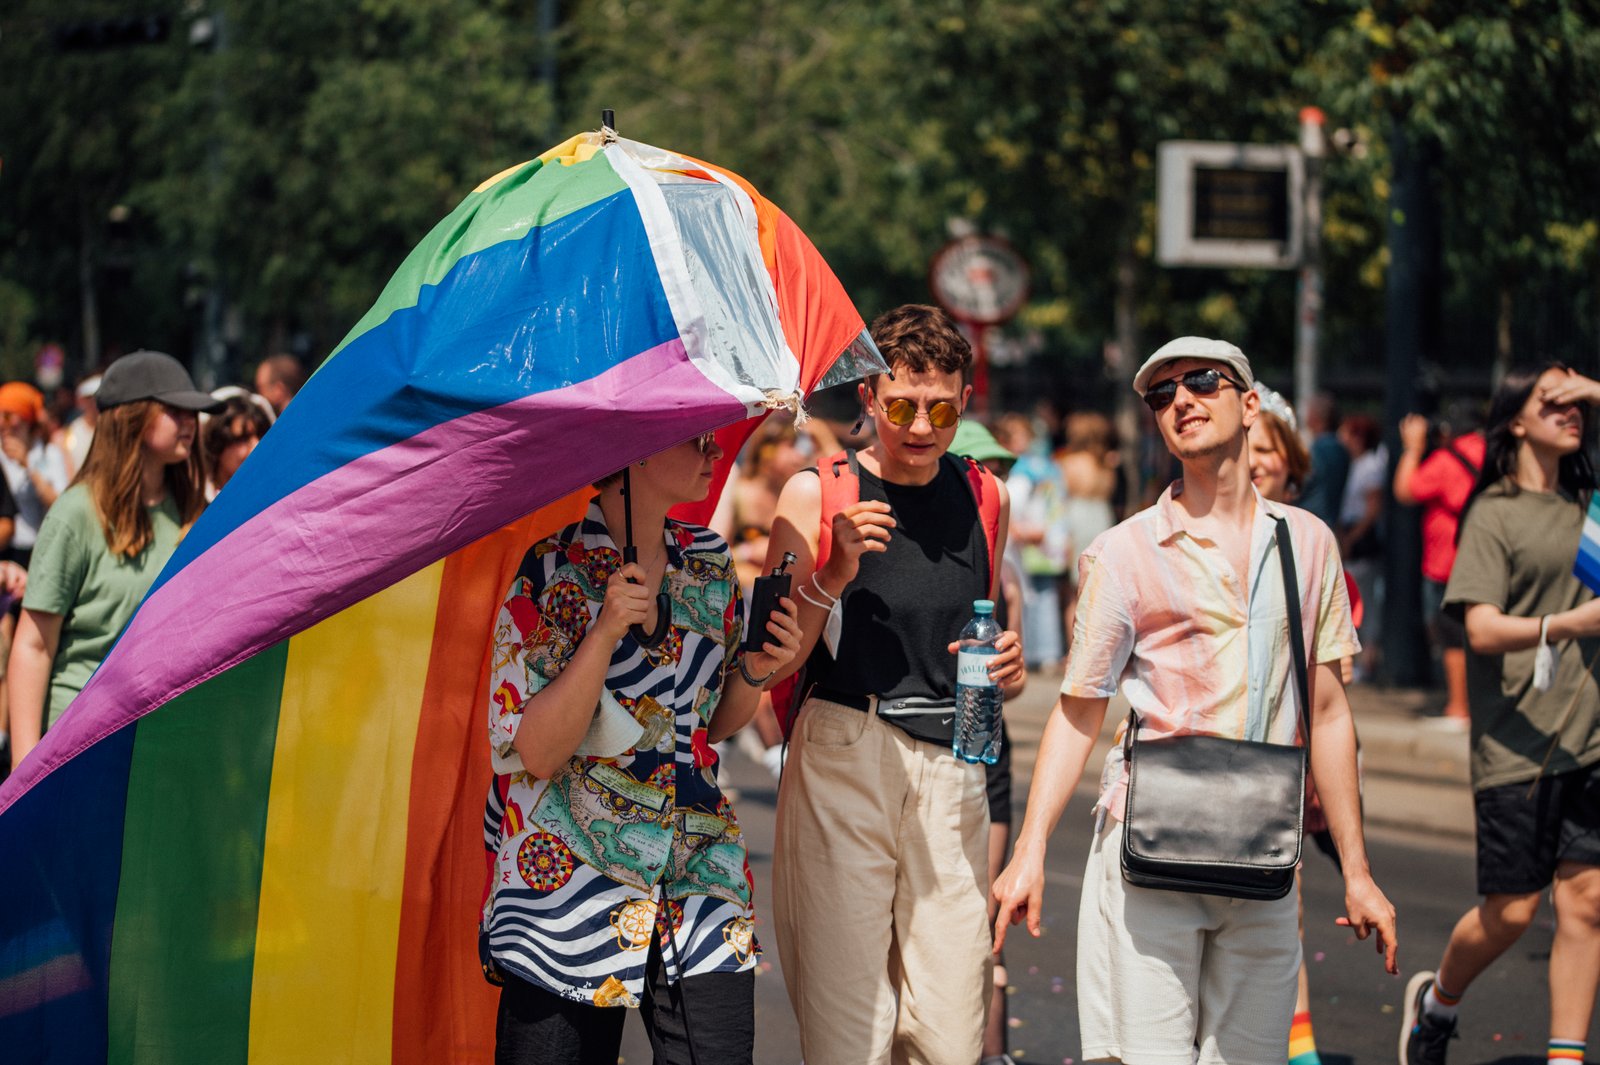 Heading 1: Understanding the Potential Challenges Faced by LGBTQ+ Young Travelers